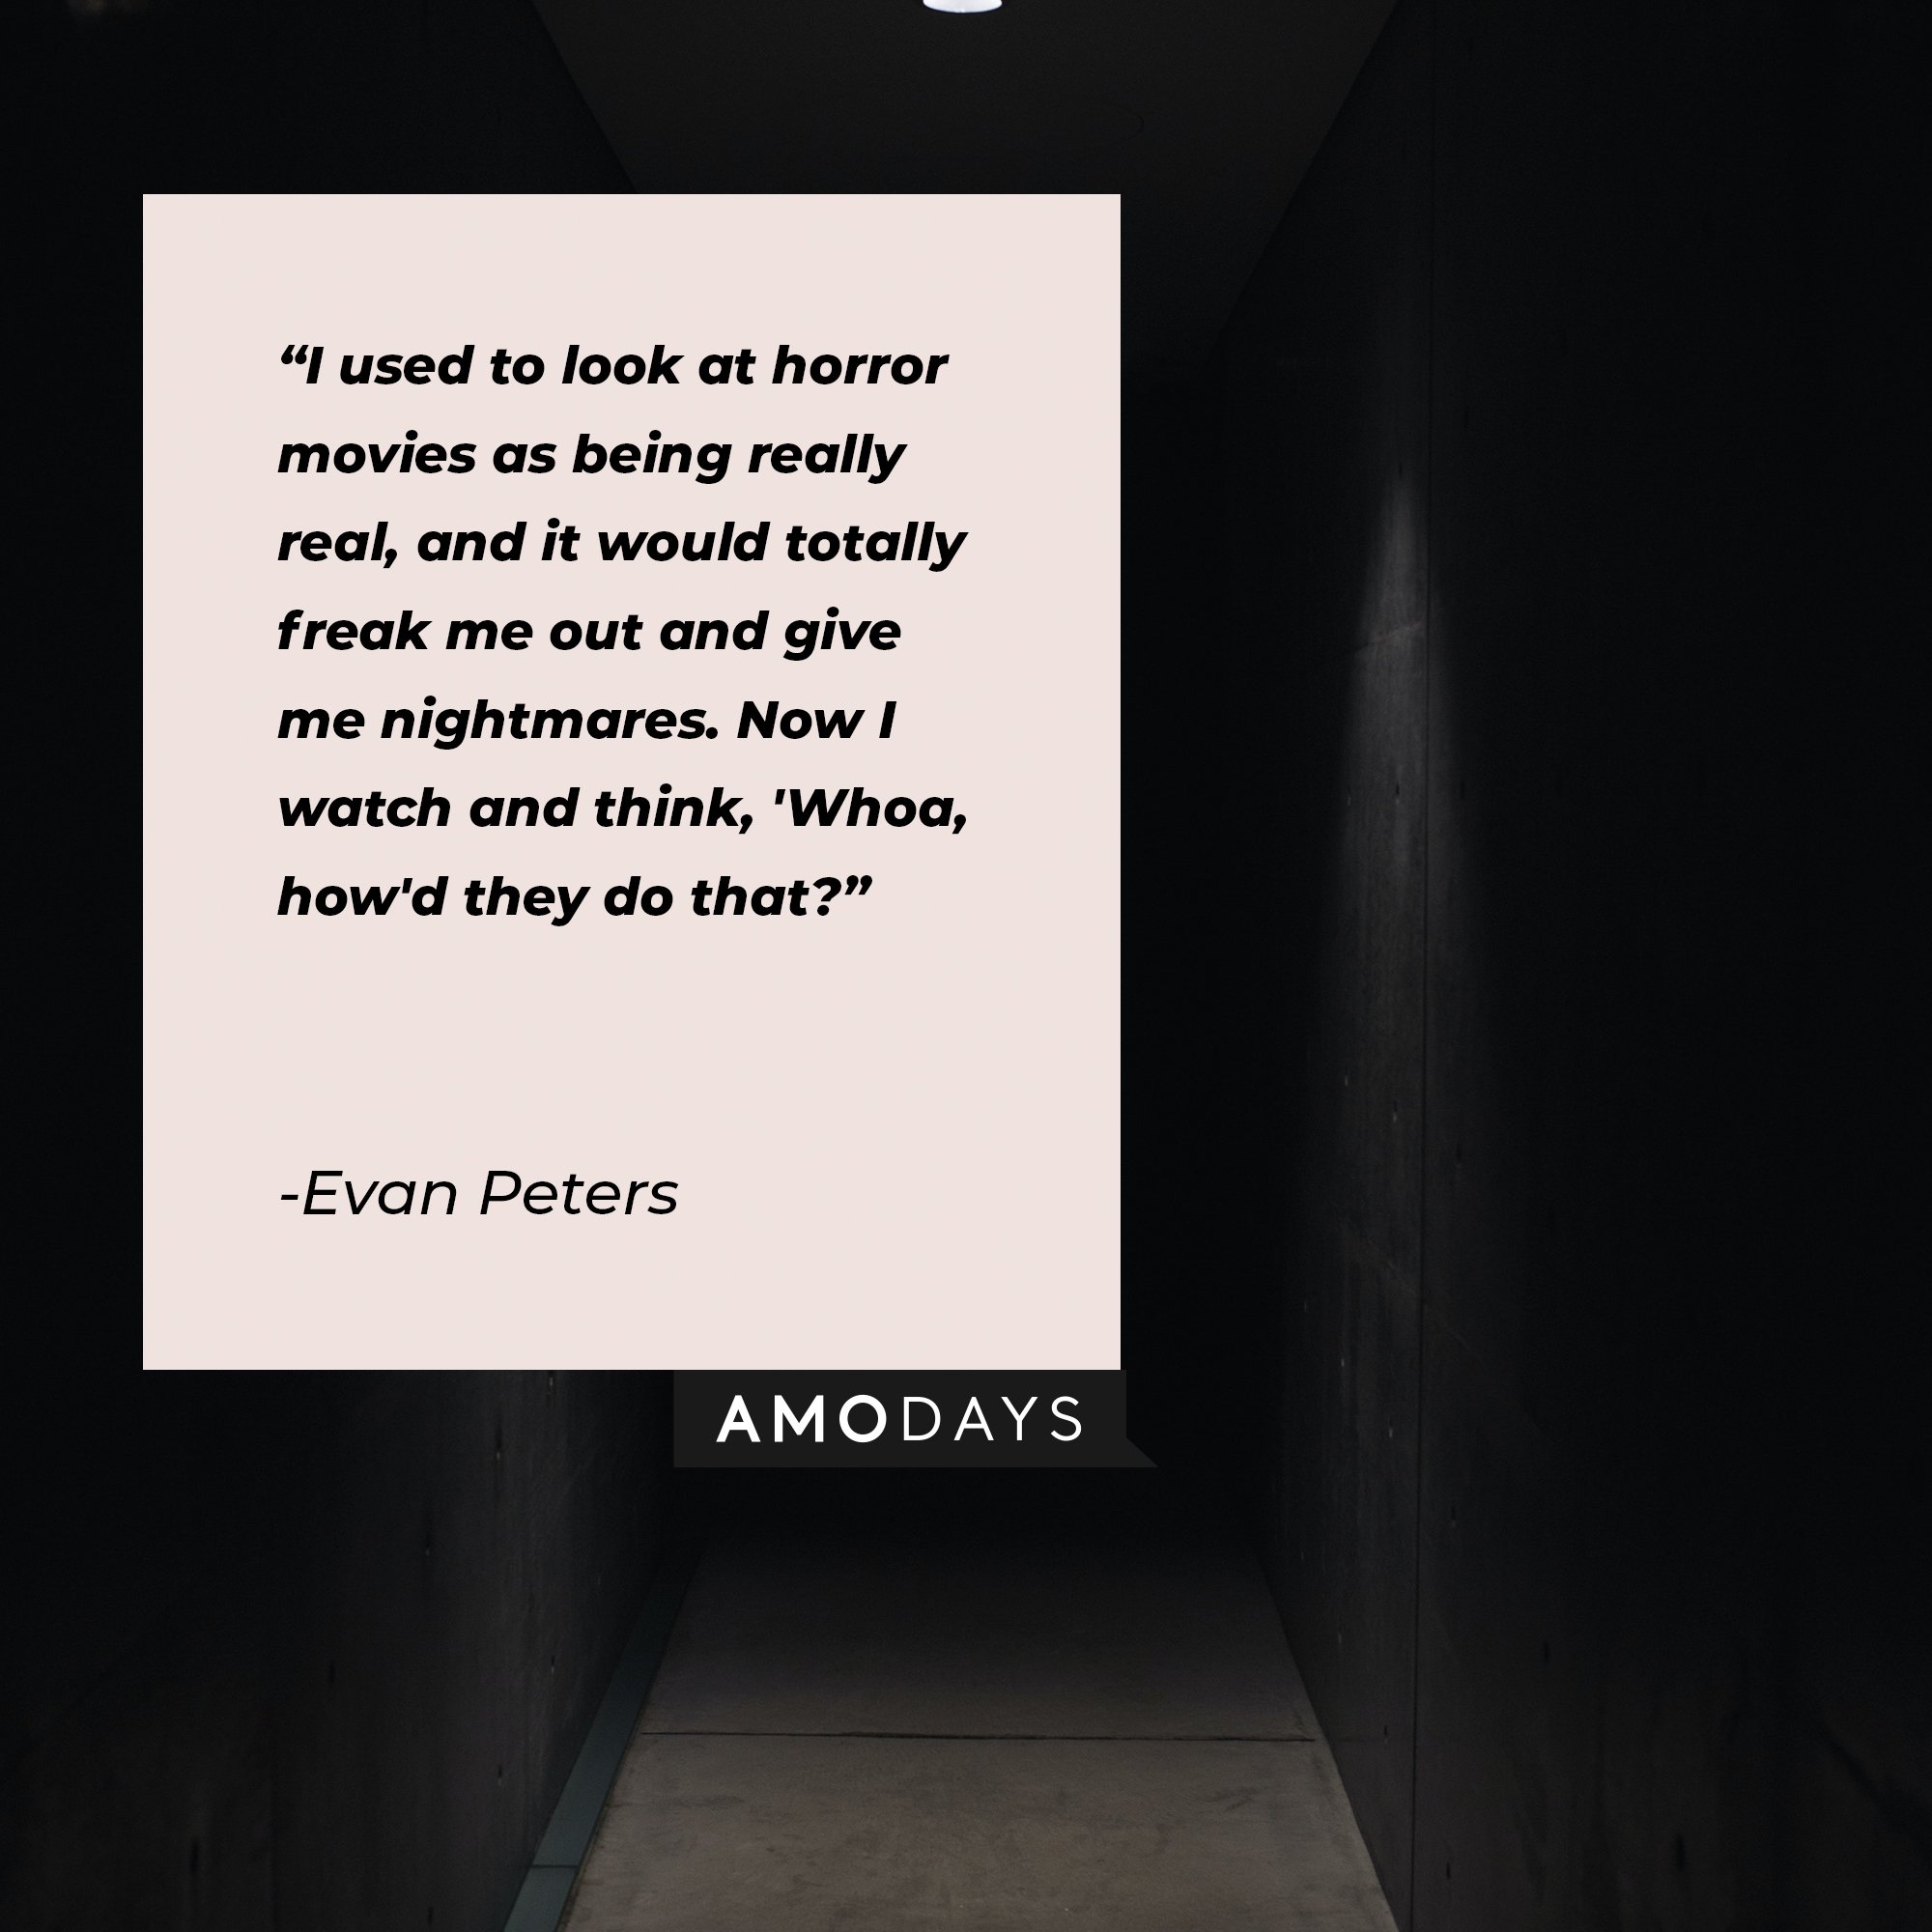  Evan Peters’ quote: "I used to look at horror movies as being really real, and it would totally freak me out and give me nightmares. Now I watch and think, 'Whoa, how'd they do that?" | Image: AmoDays